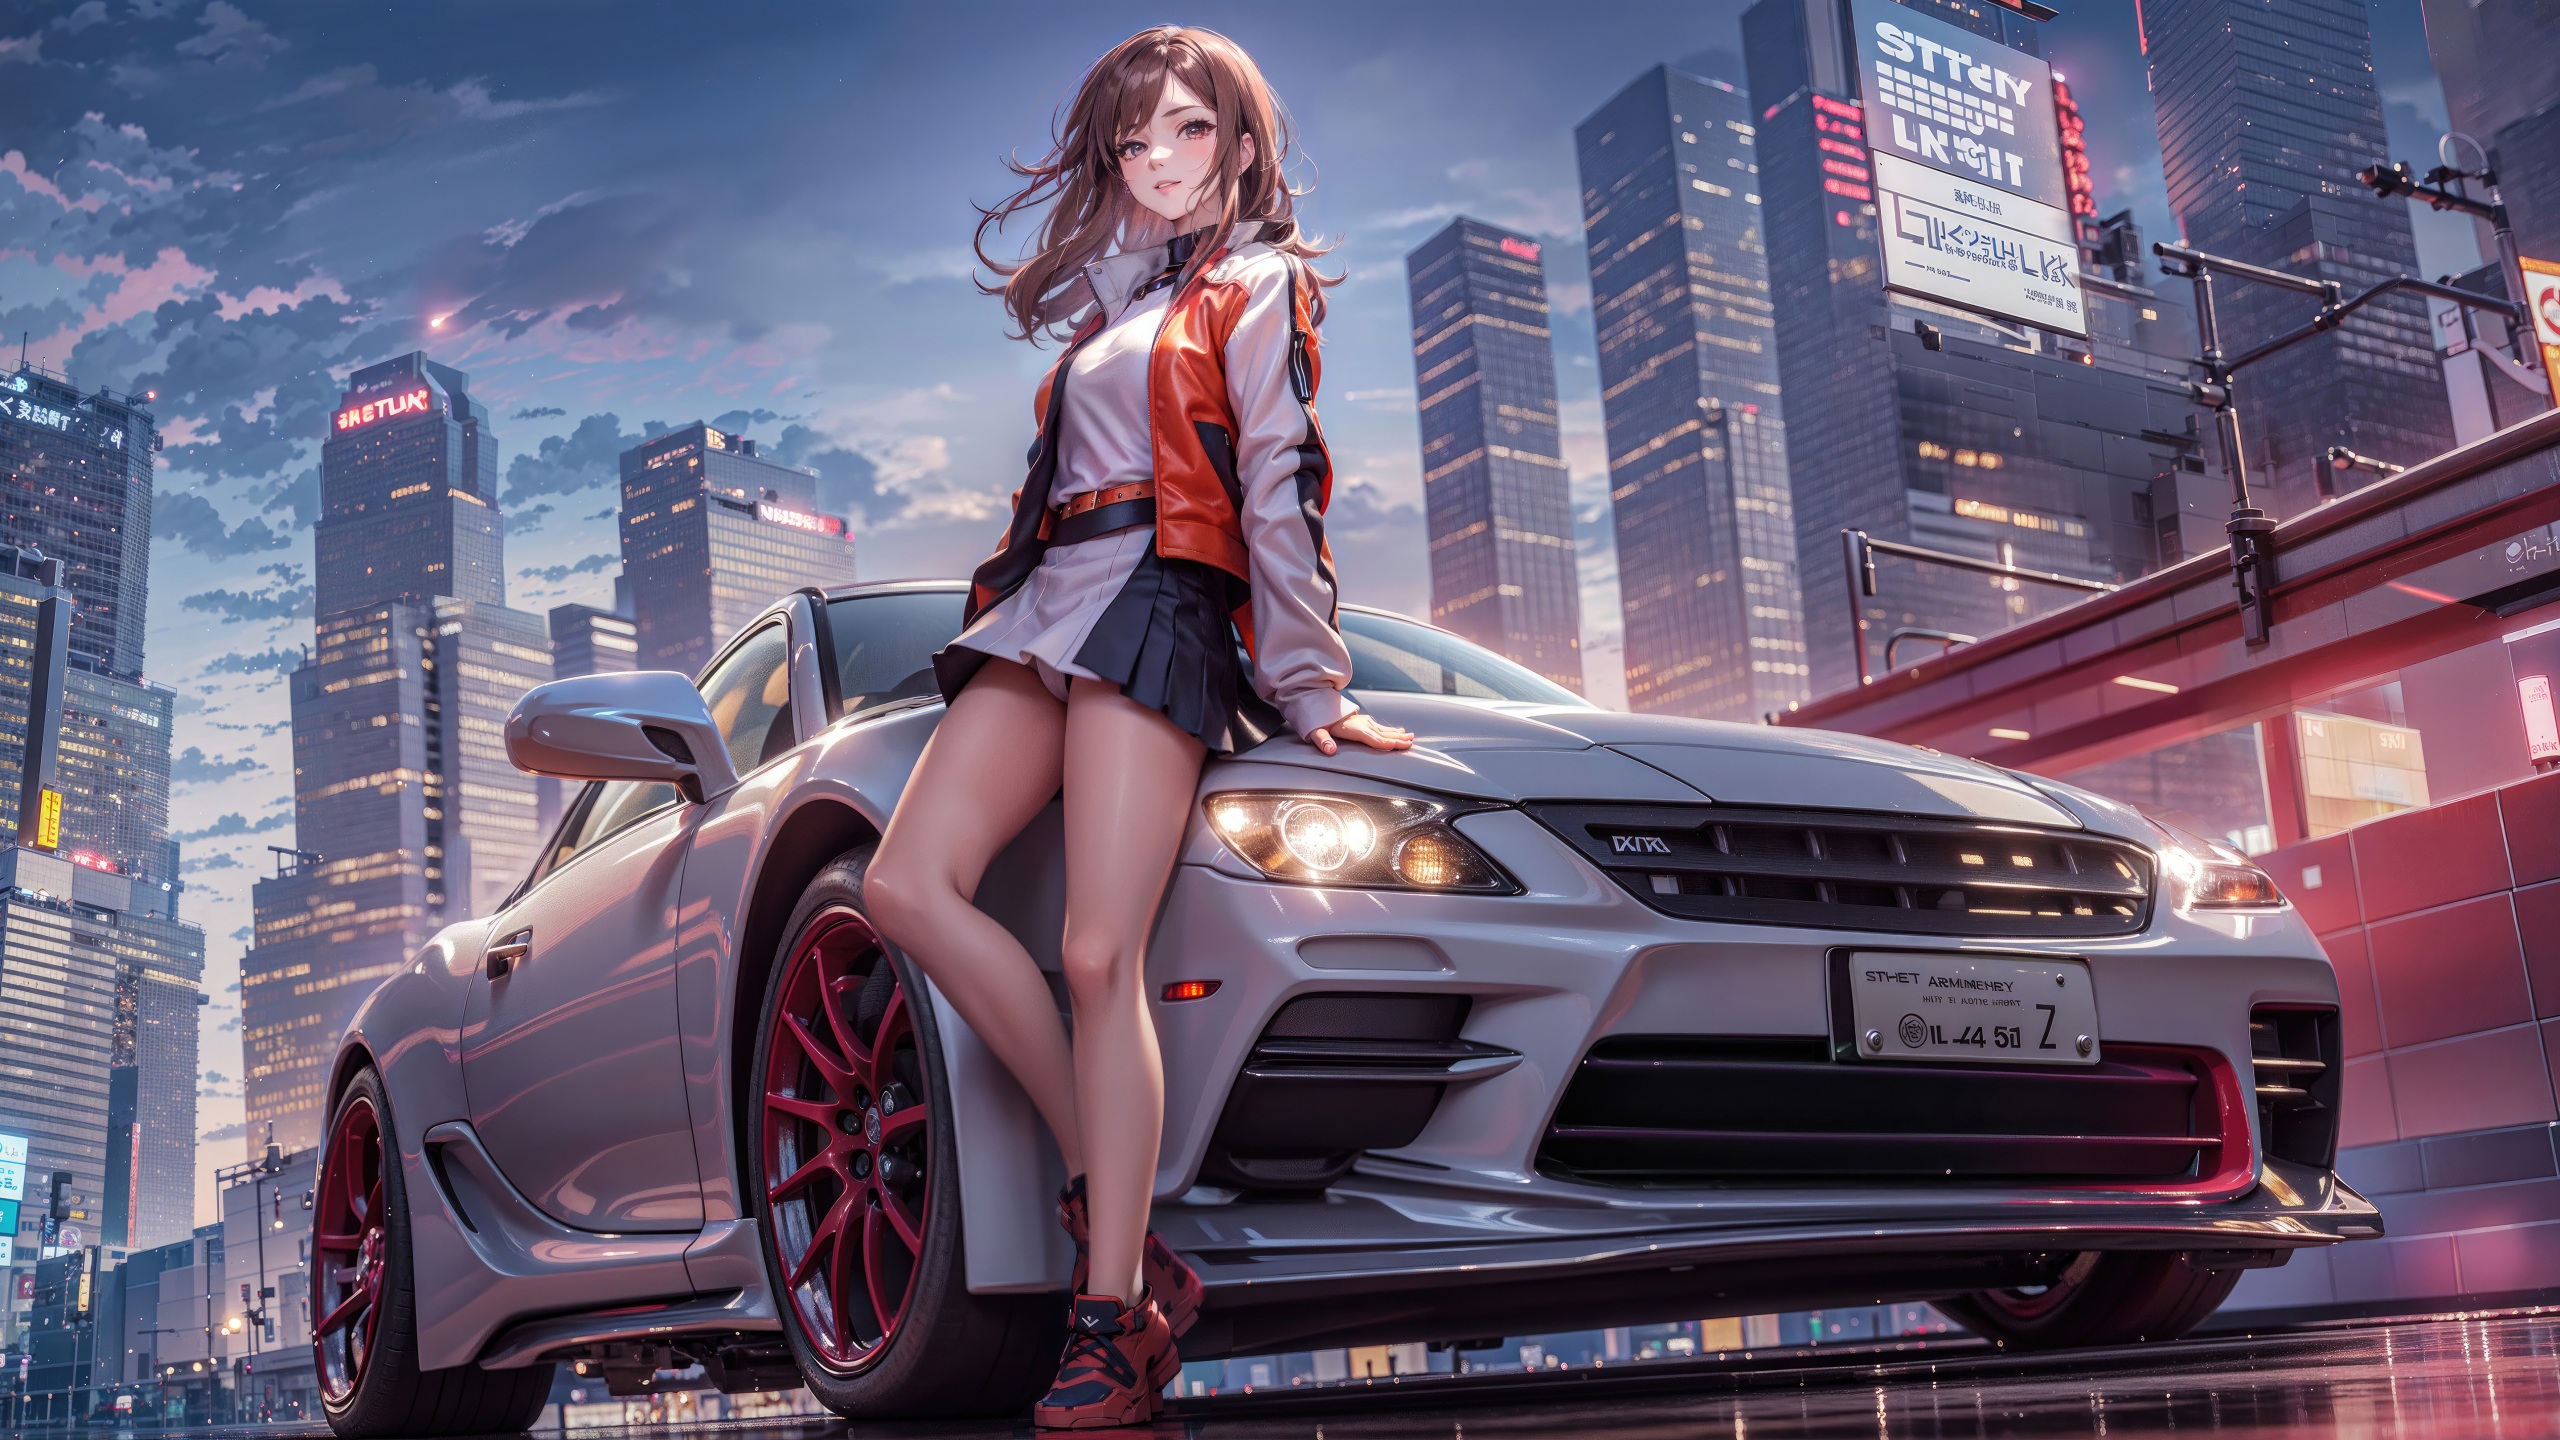 Anime Girl With Cars 4k - 4k Wallpapers - 40.000+ ipad wallpapers 4k ...